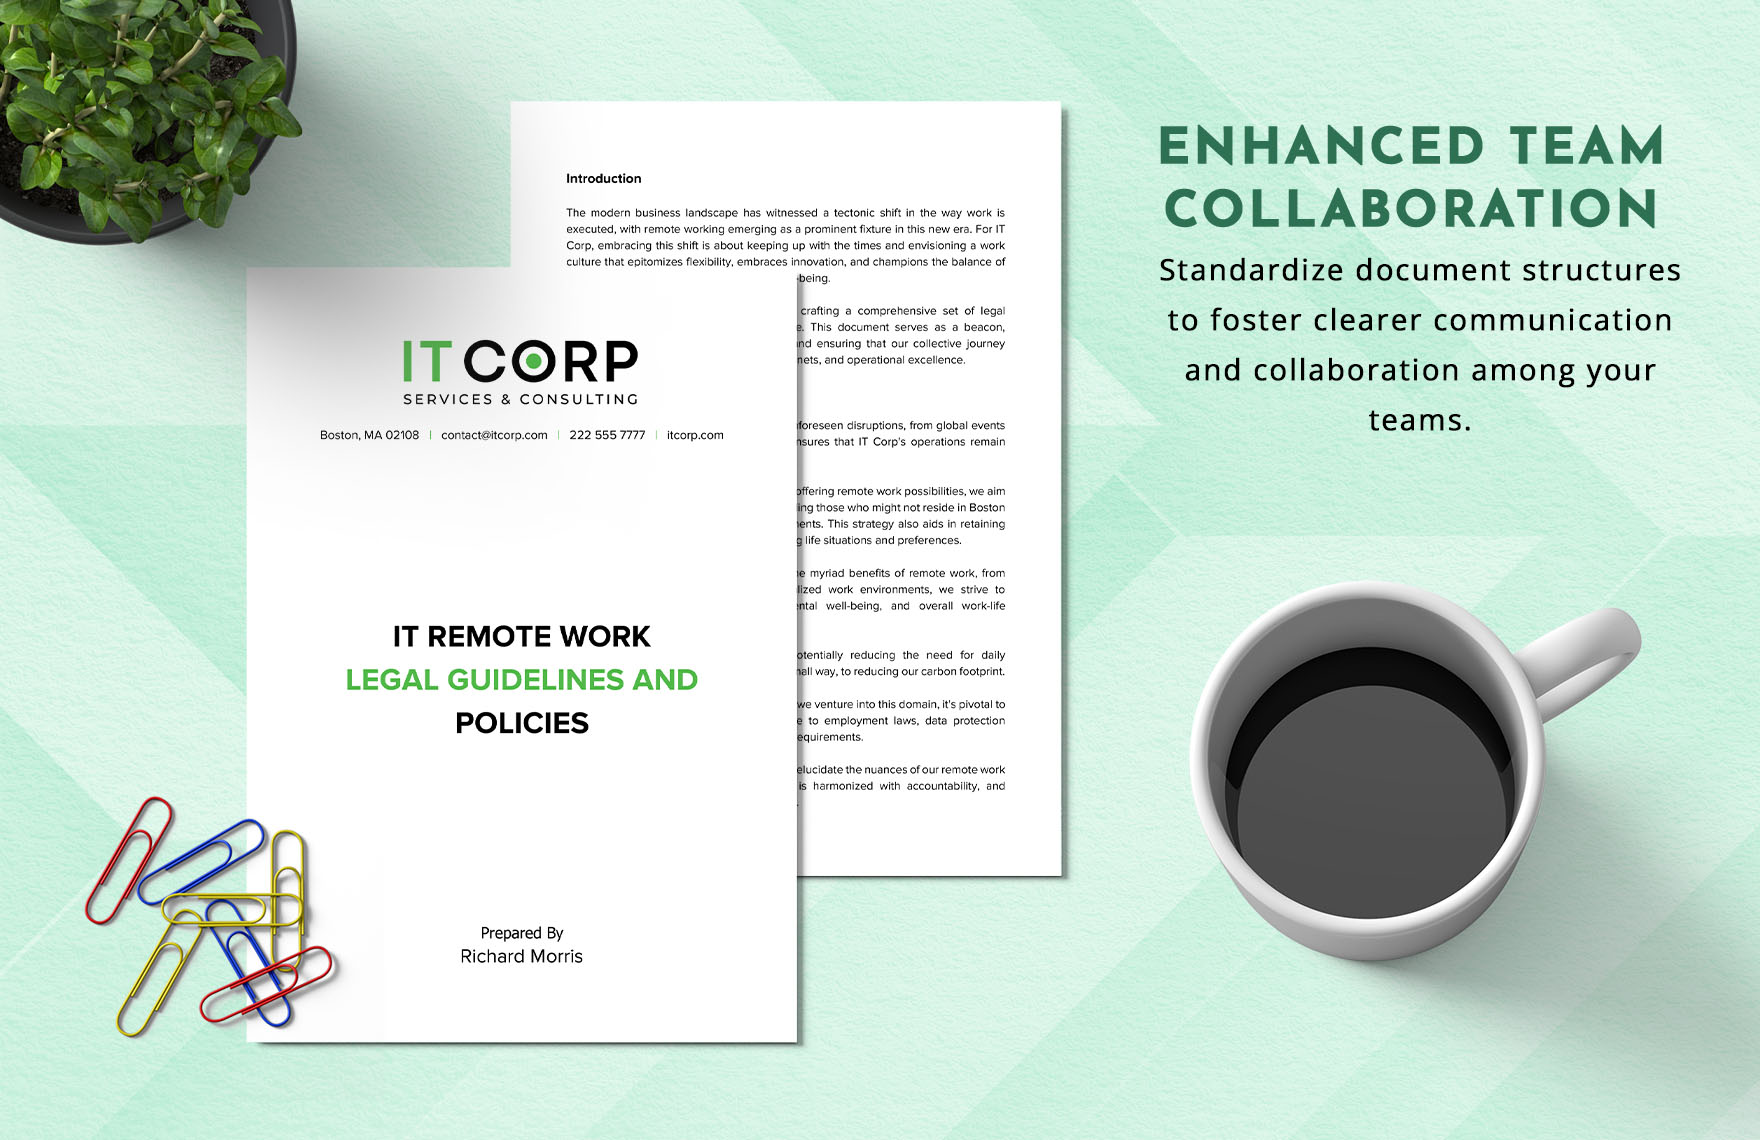 IT Remote Work Legal Guidelines and Policies Template